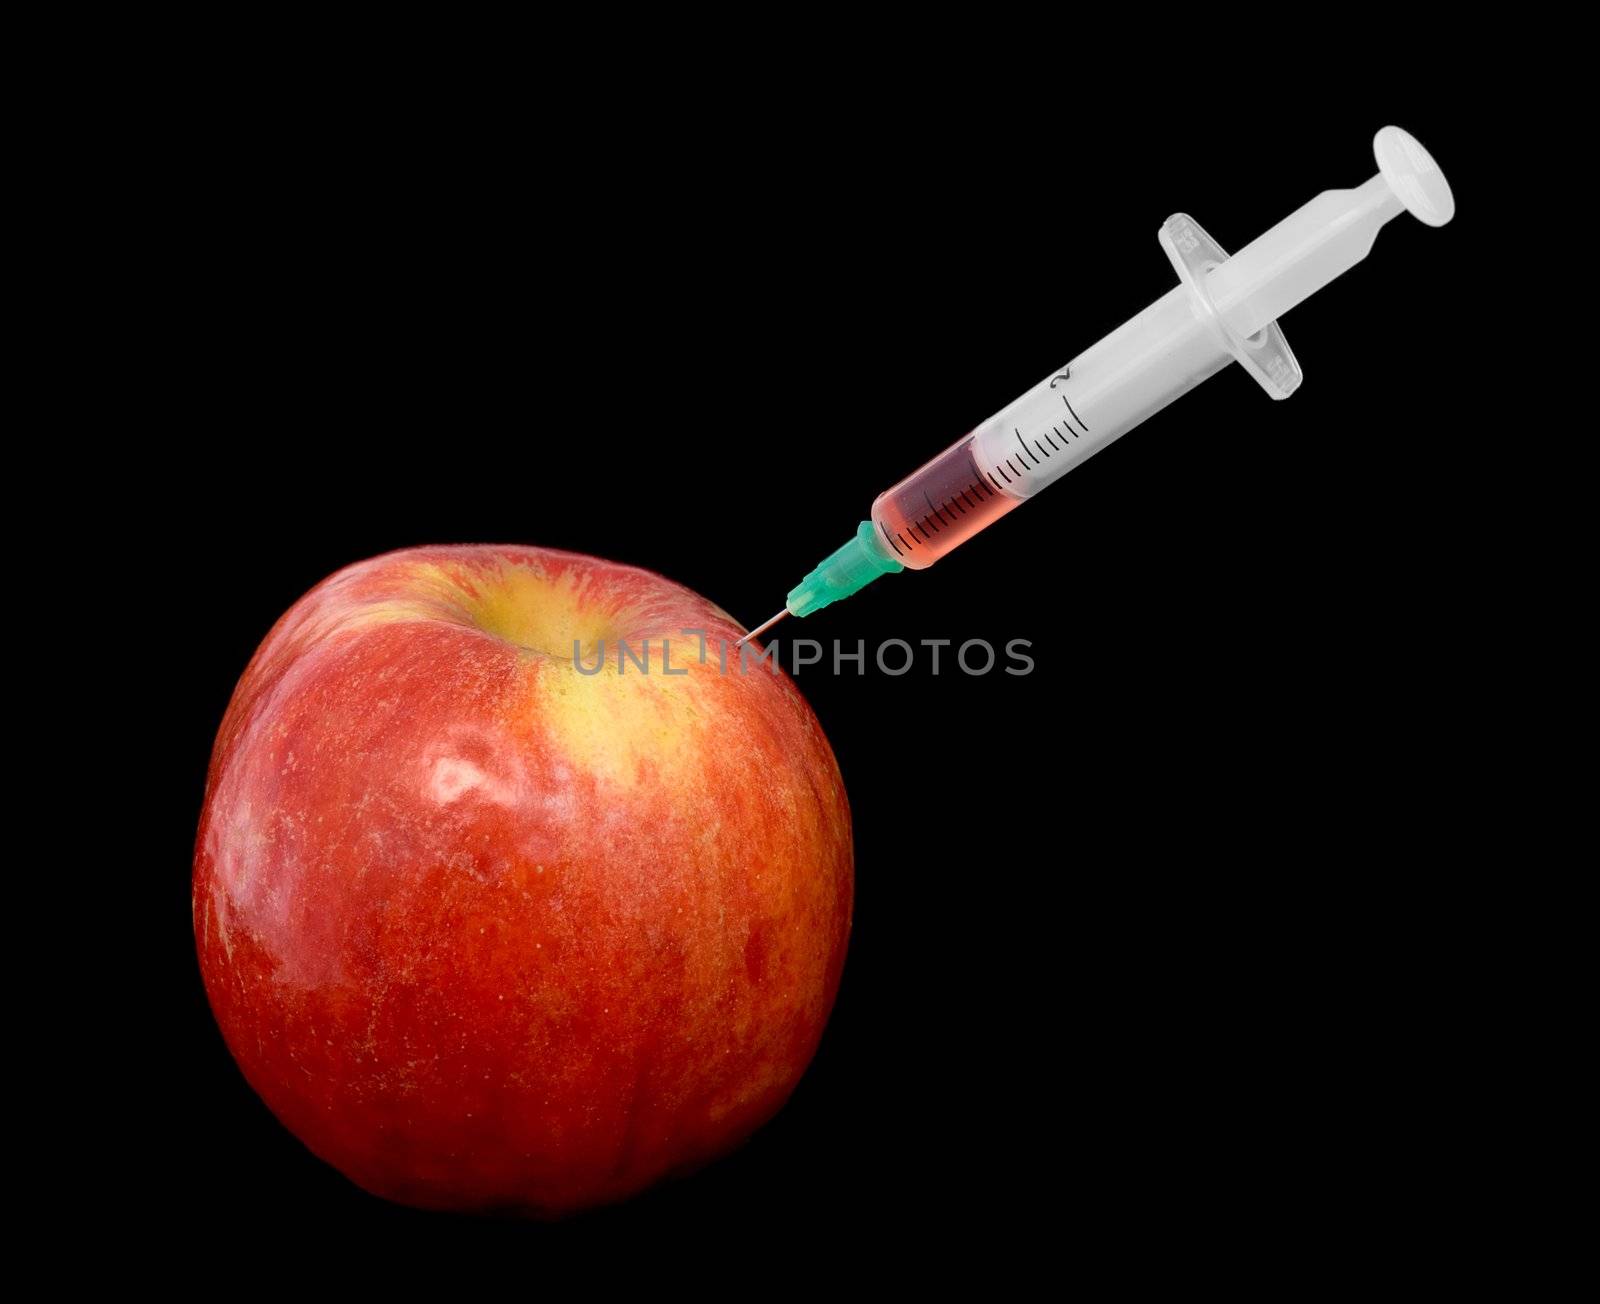 Red apple with a syringe by pzaxe